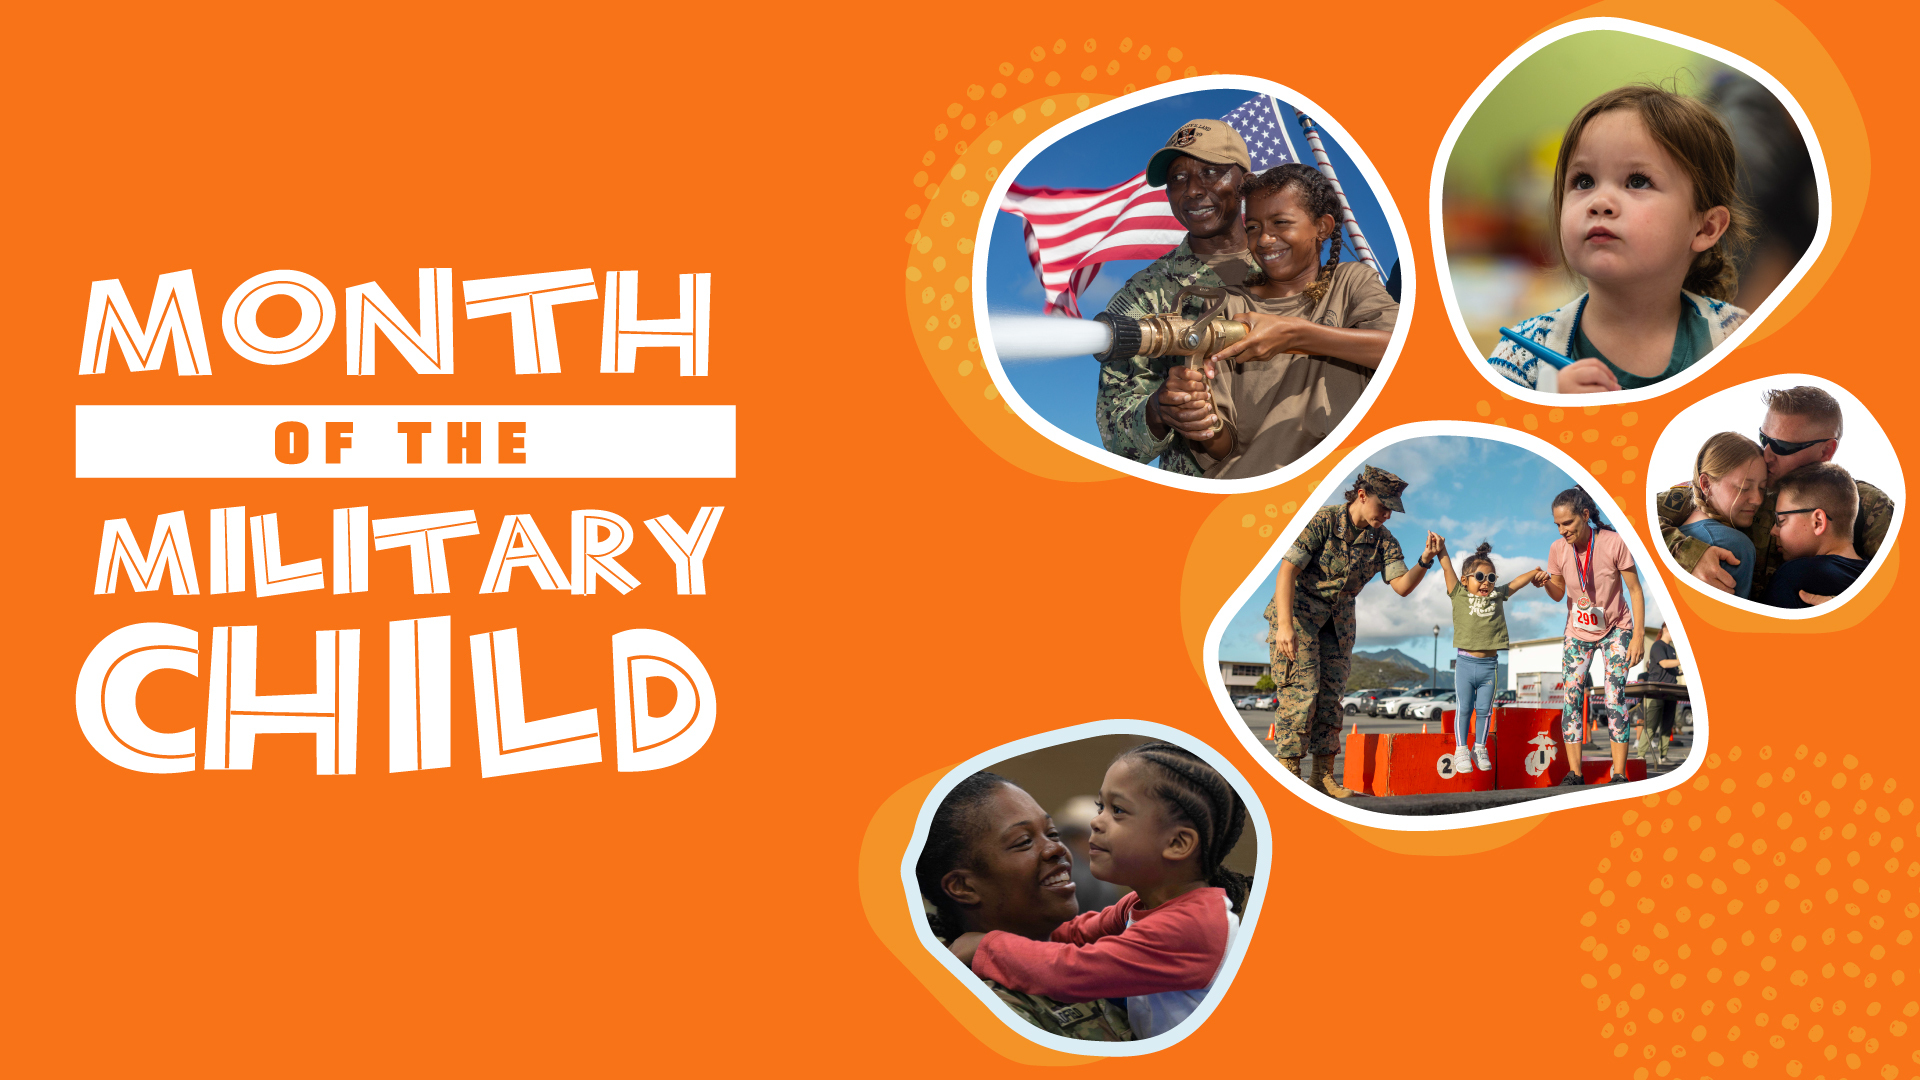 Month of the Military Child image